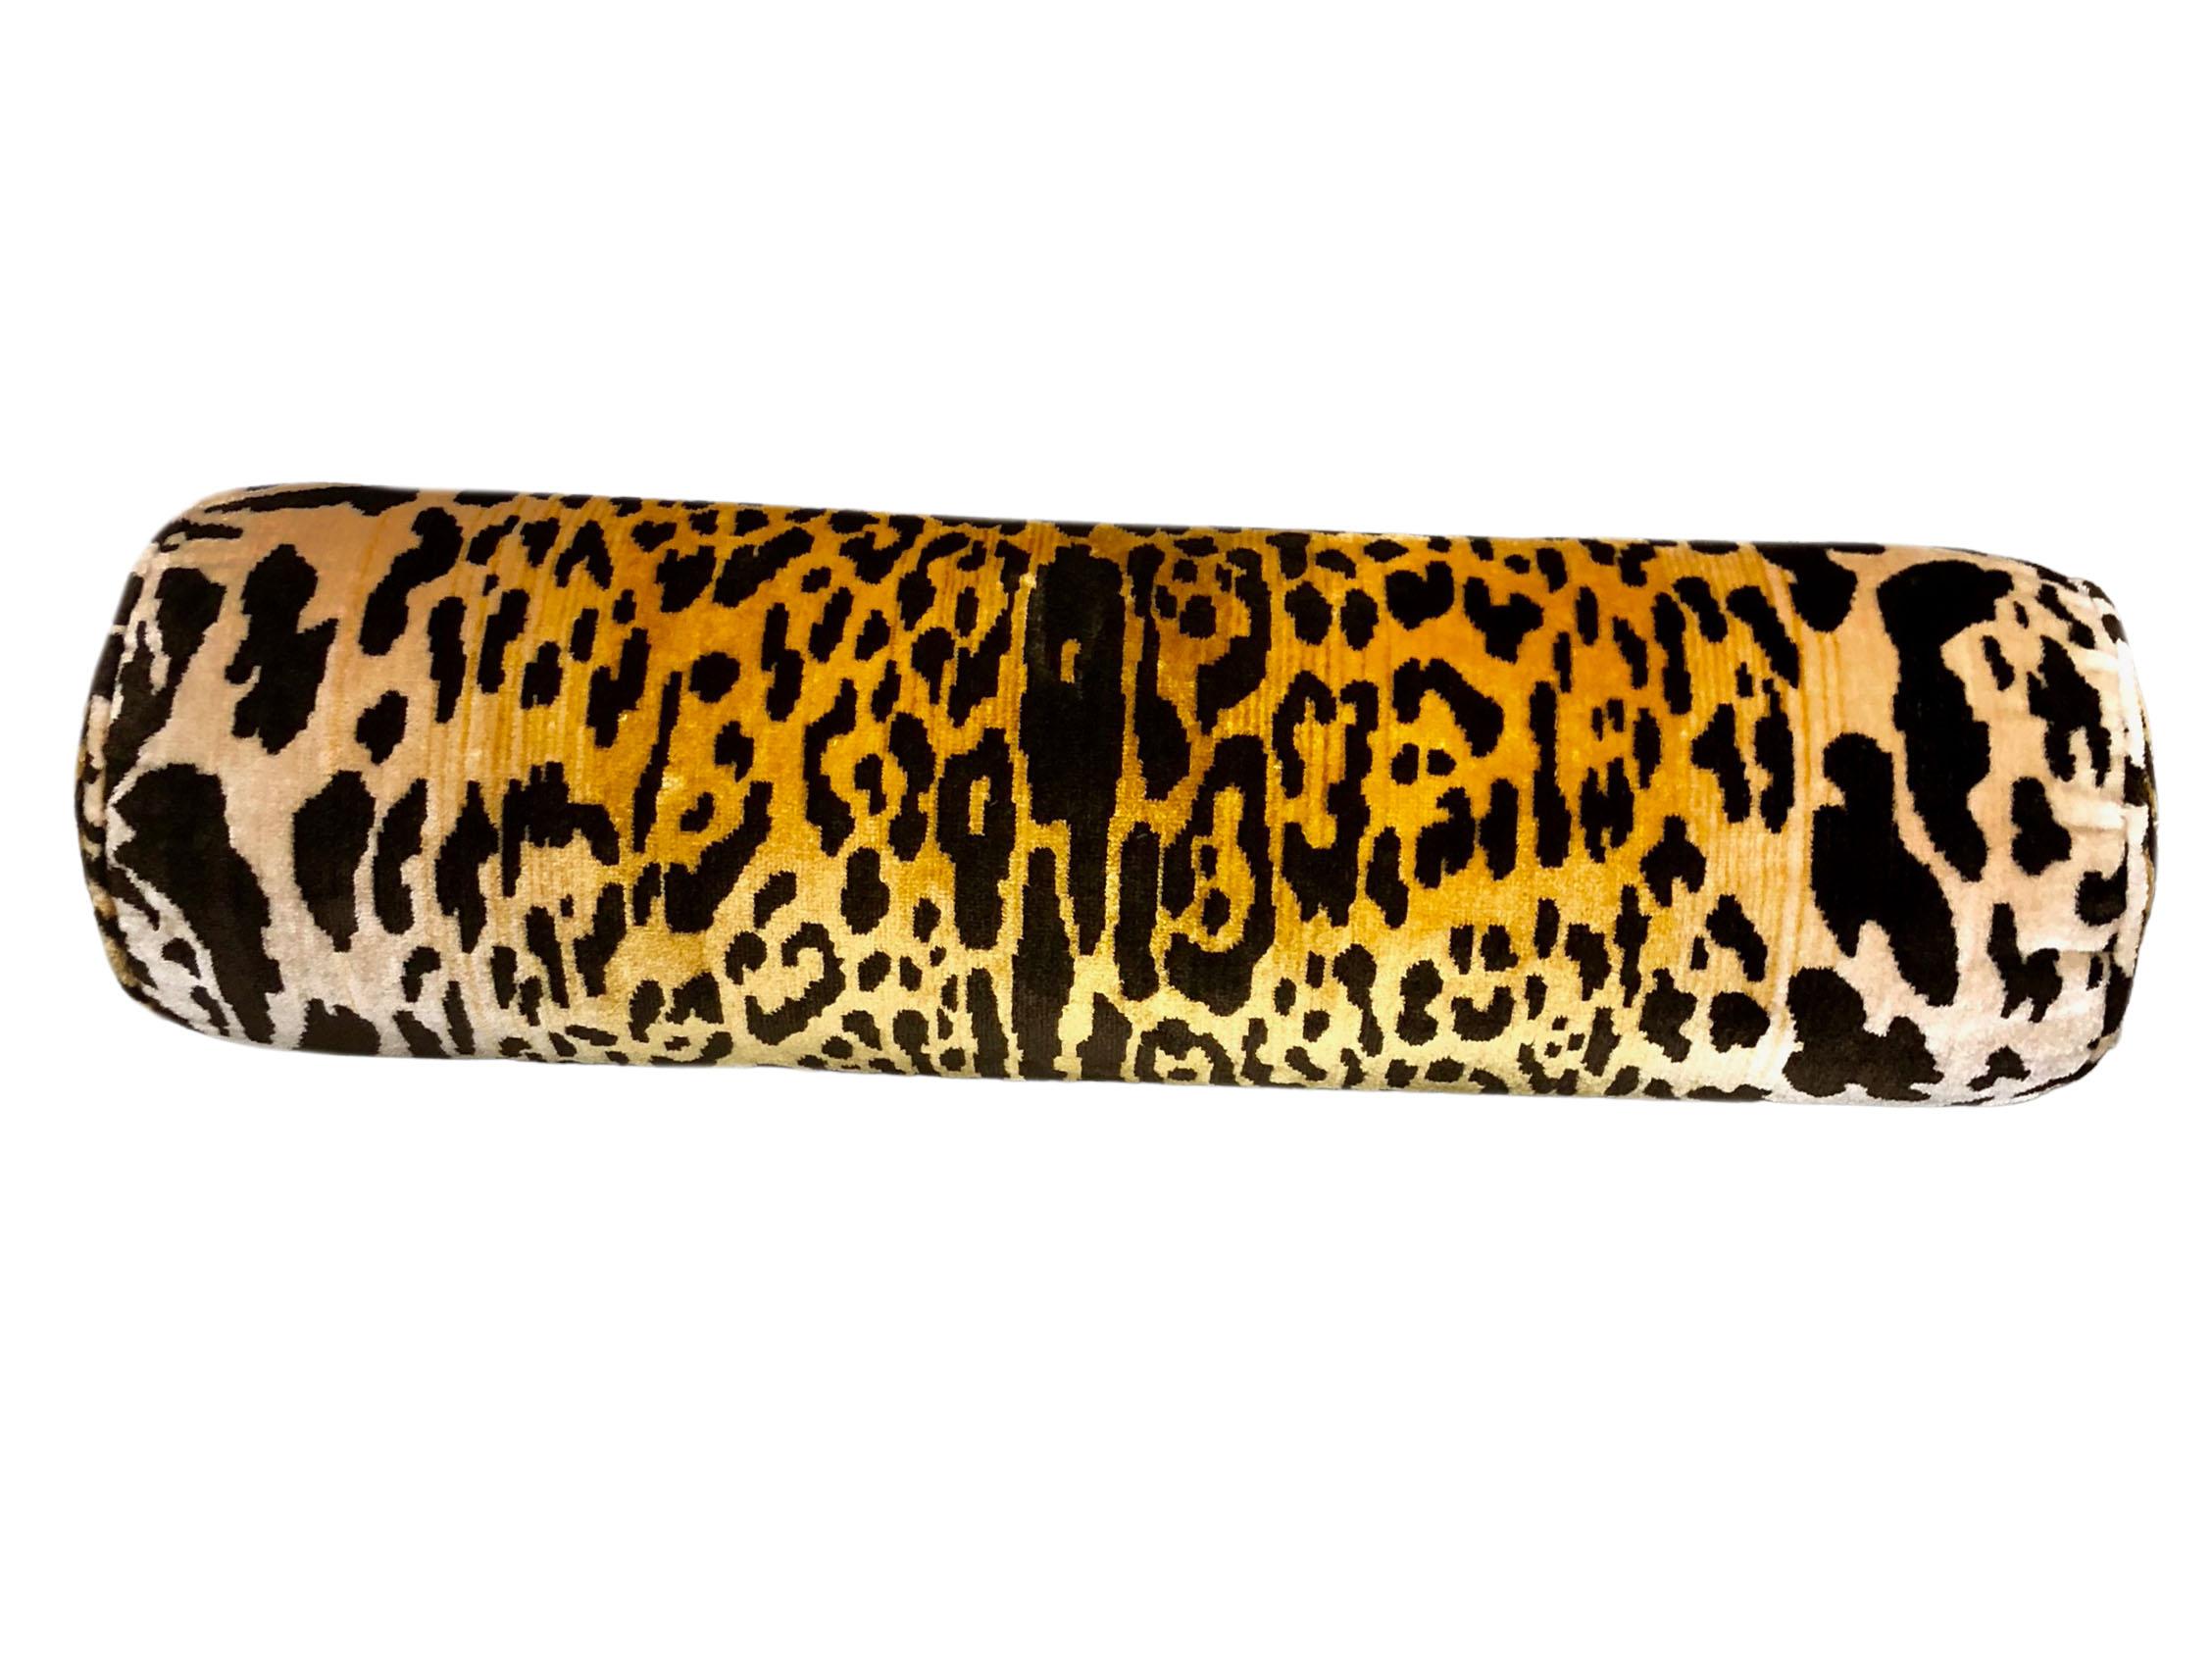 A vintage animal print bolster In velvet leopard Scalamandré fabric from the 1970s. Two available.